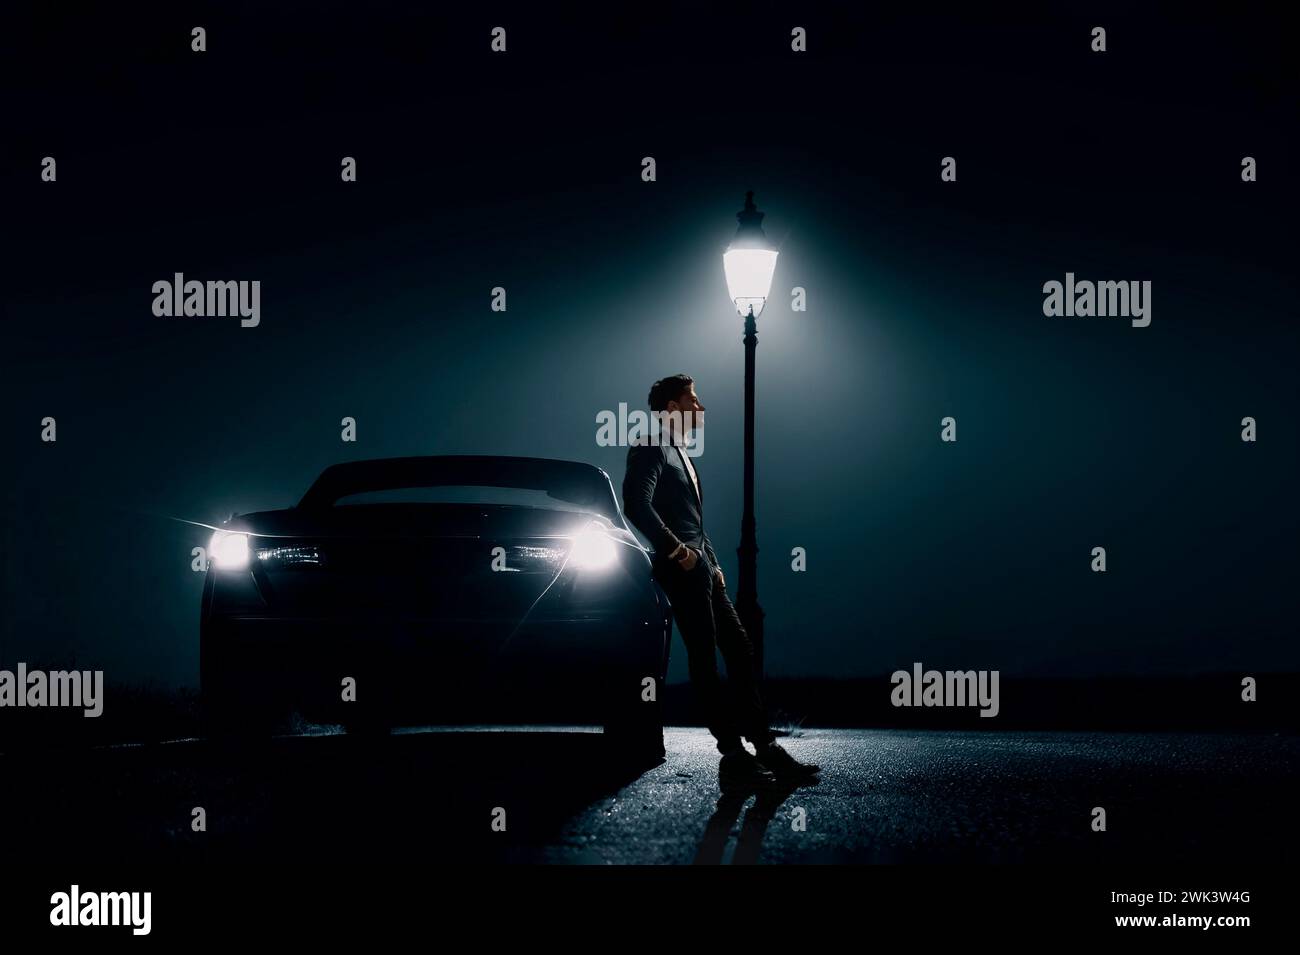 Man leaning against car with lamp post at night, USA Stock Photo